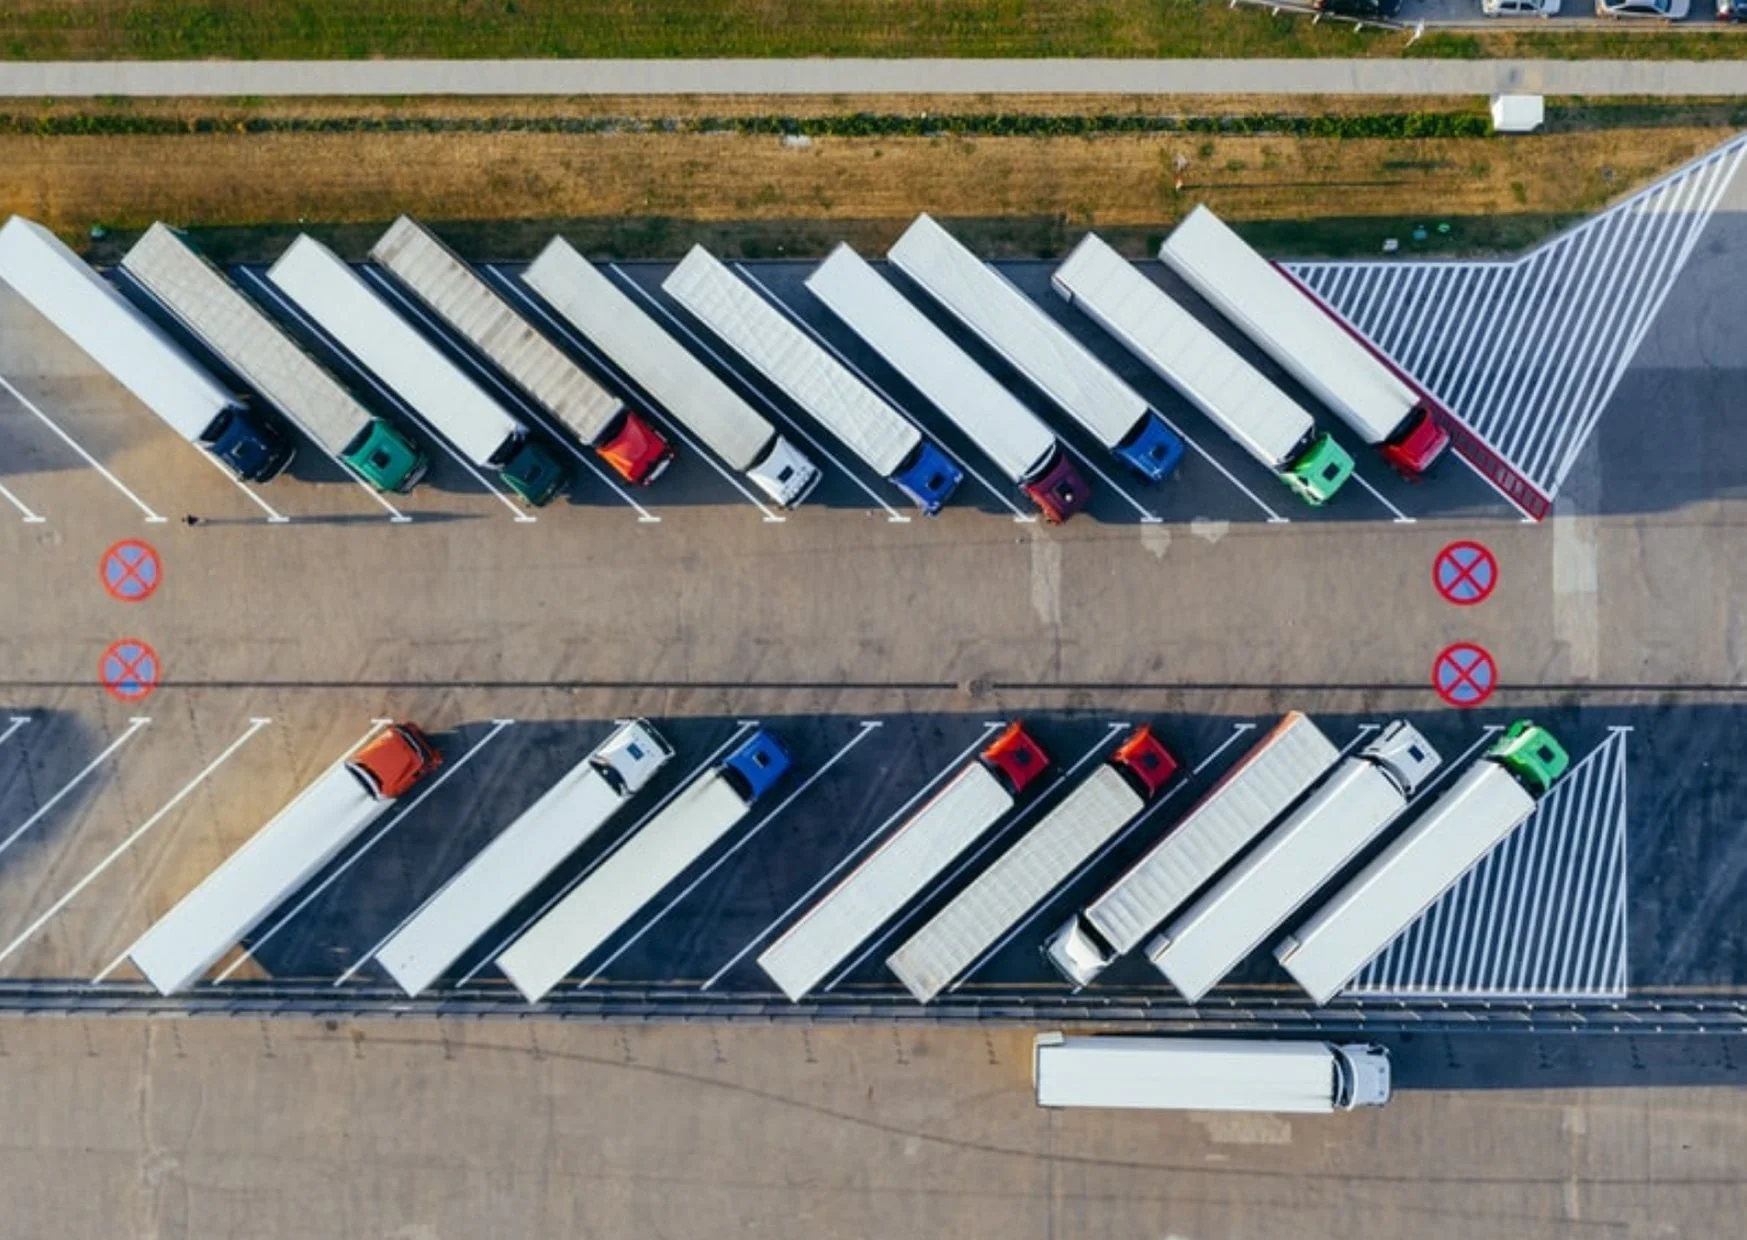 Making zero-emission road freight a reality